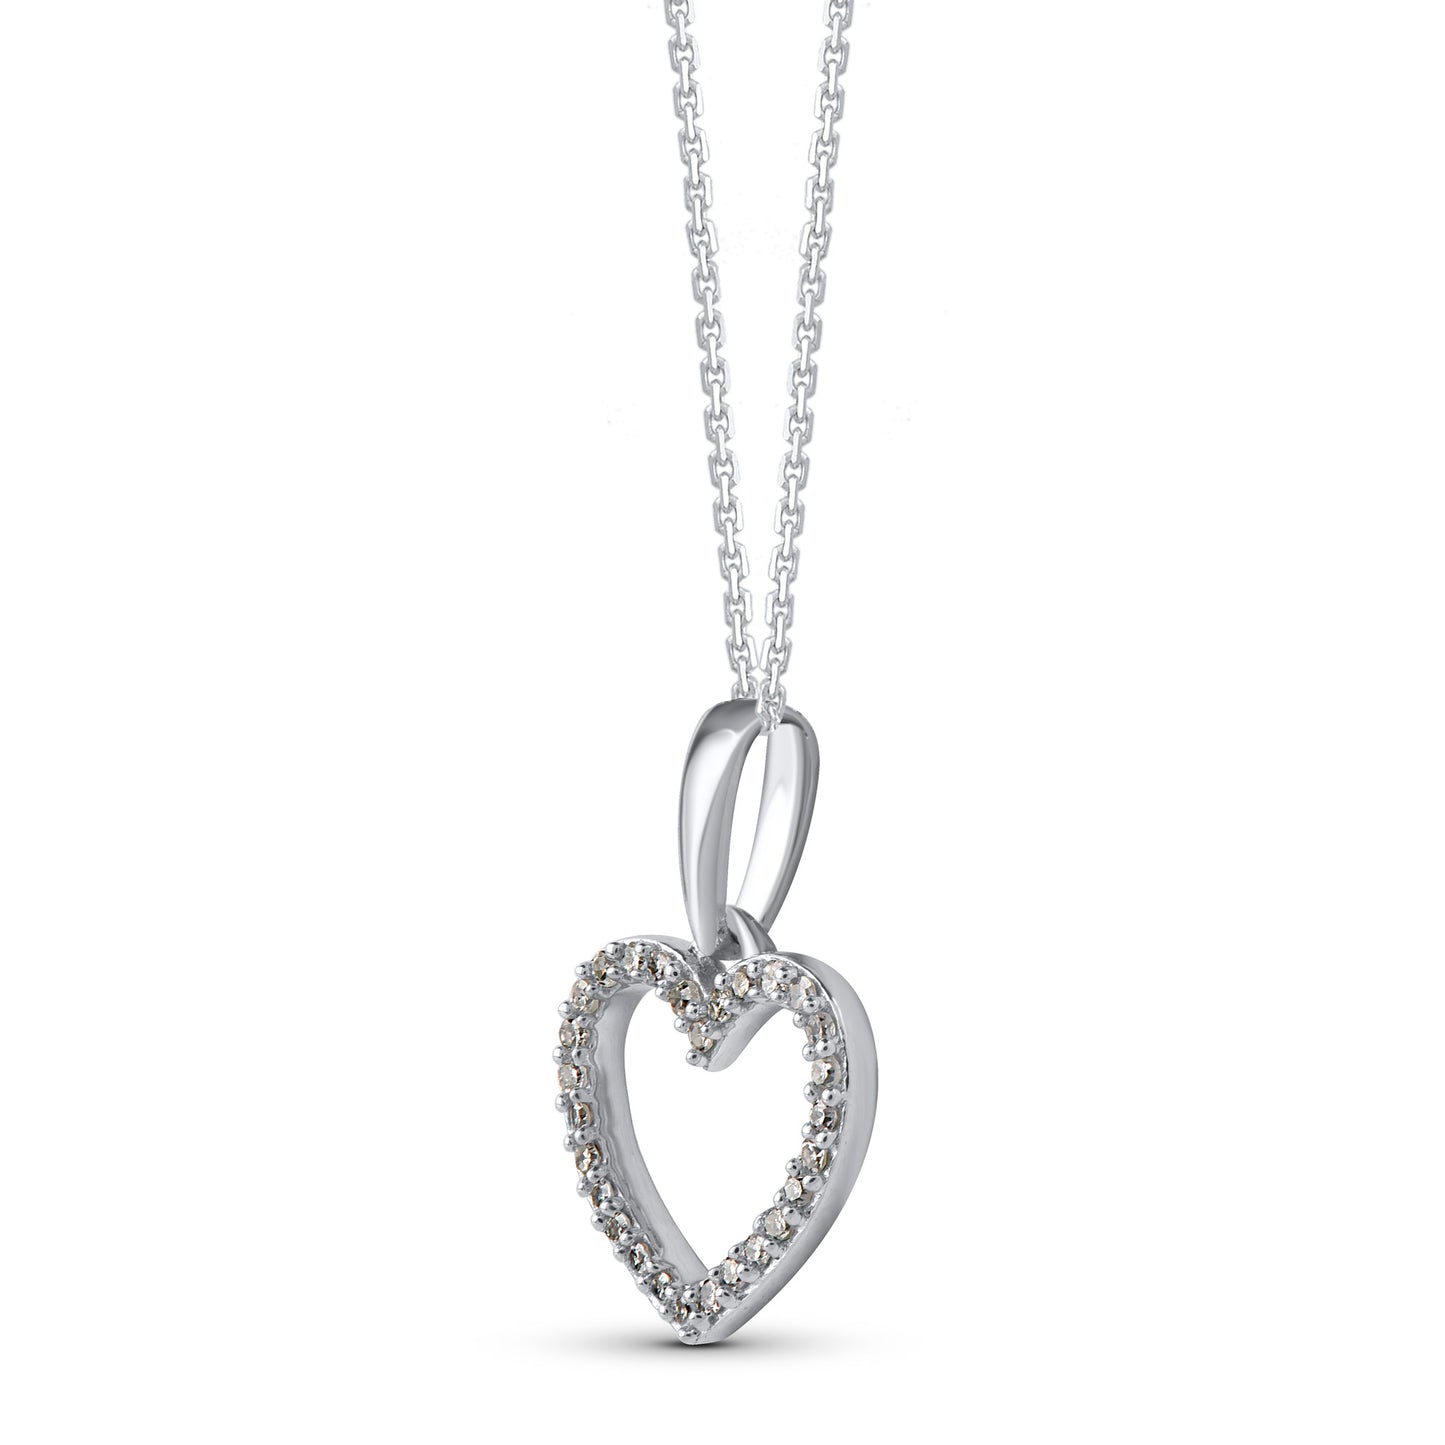 Heart Pendant Necklace in 925 Sterling Silver